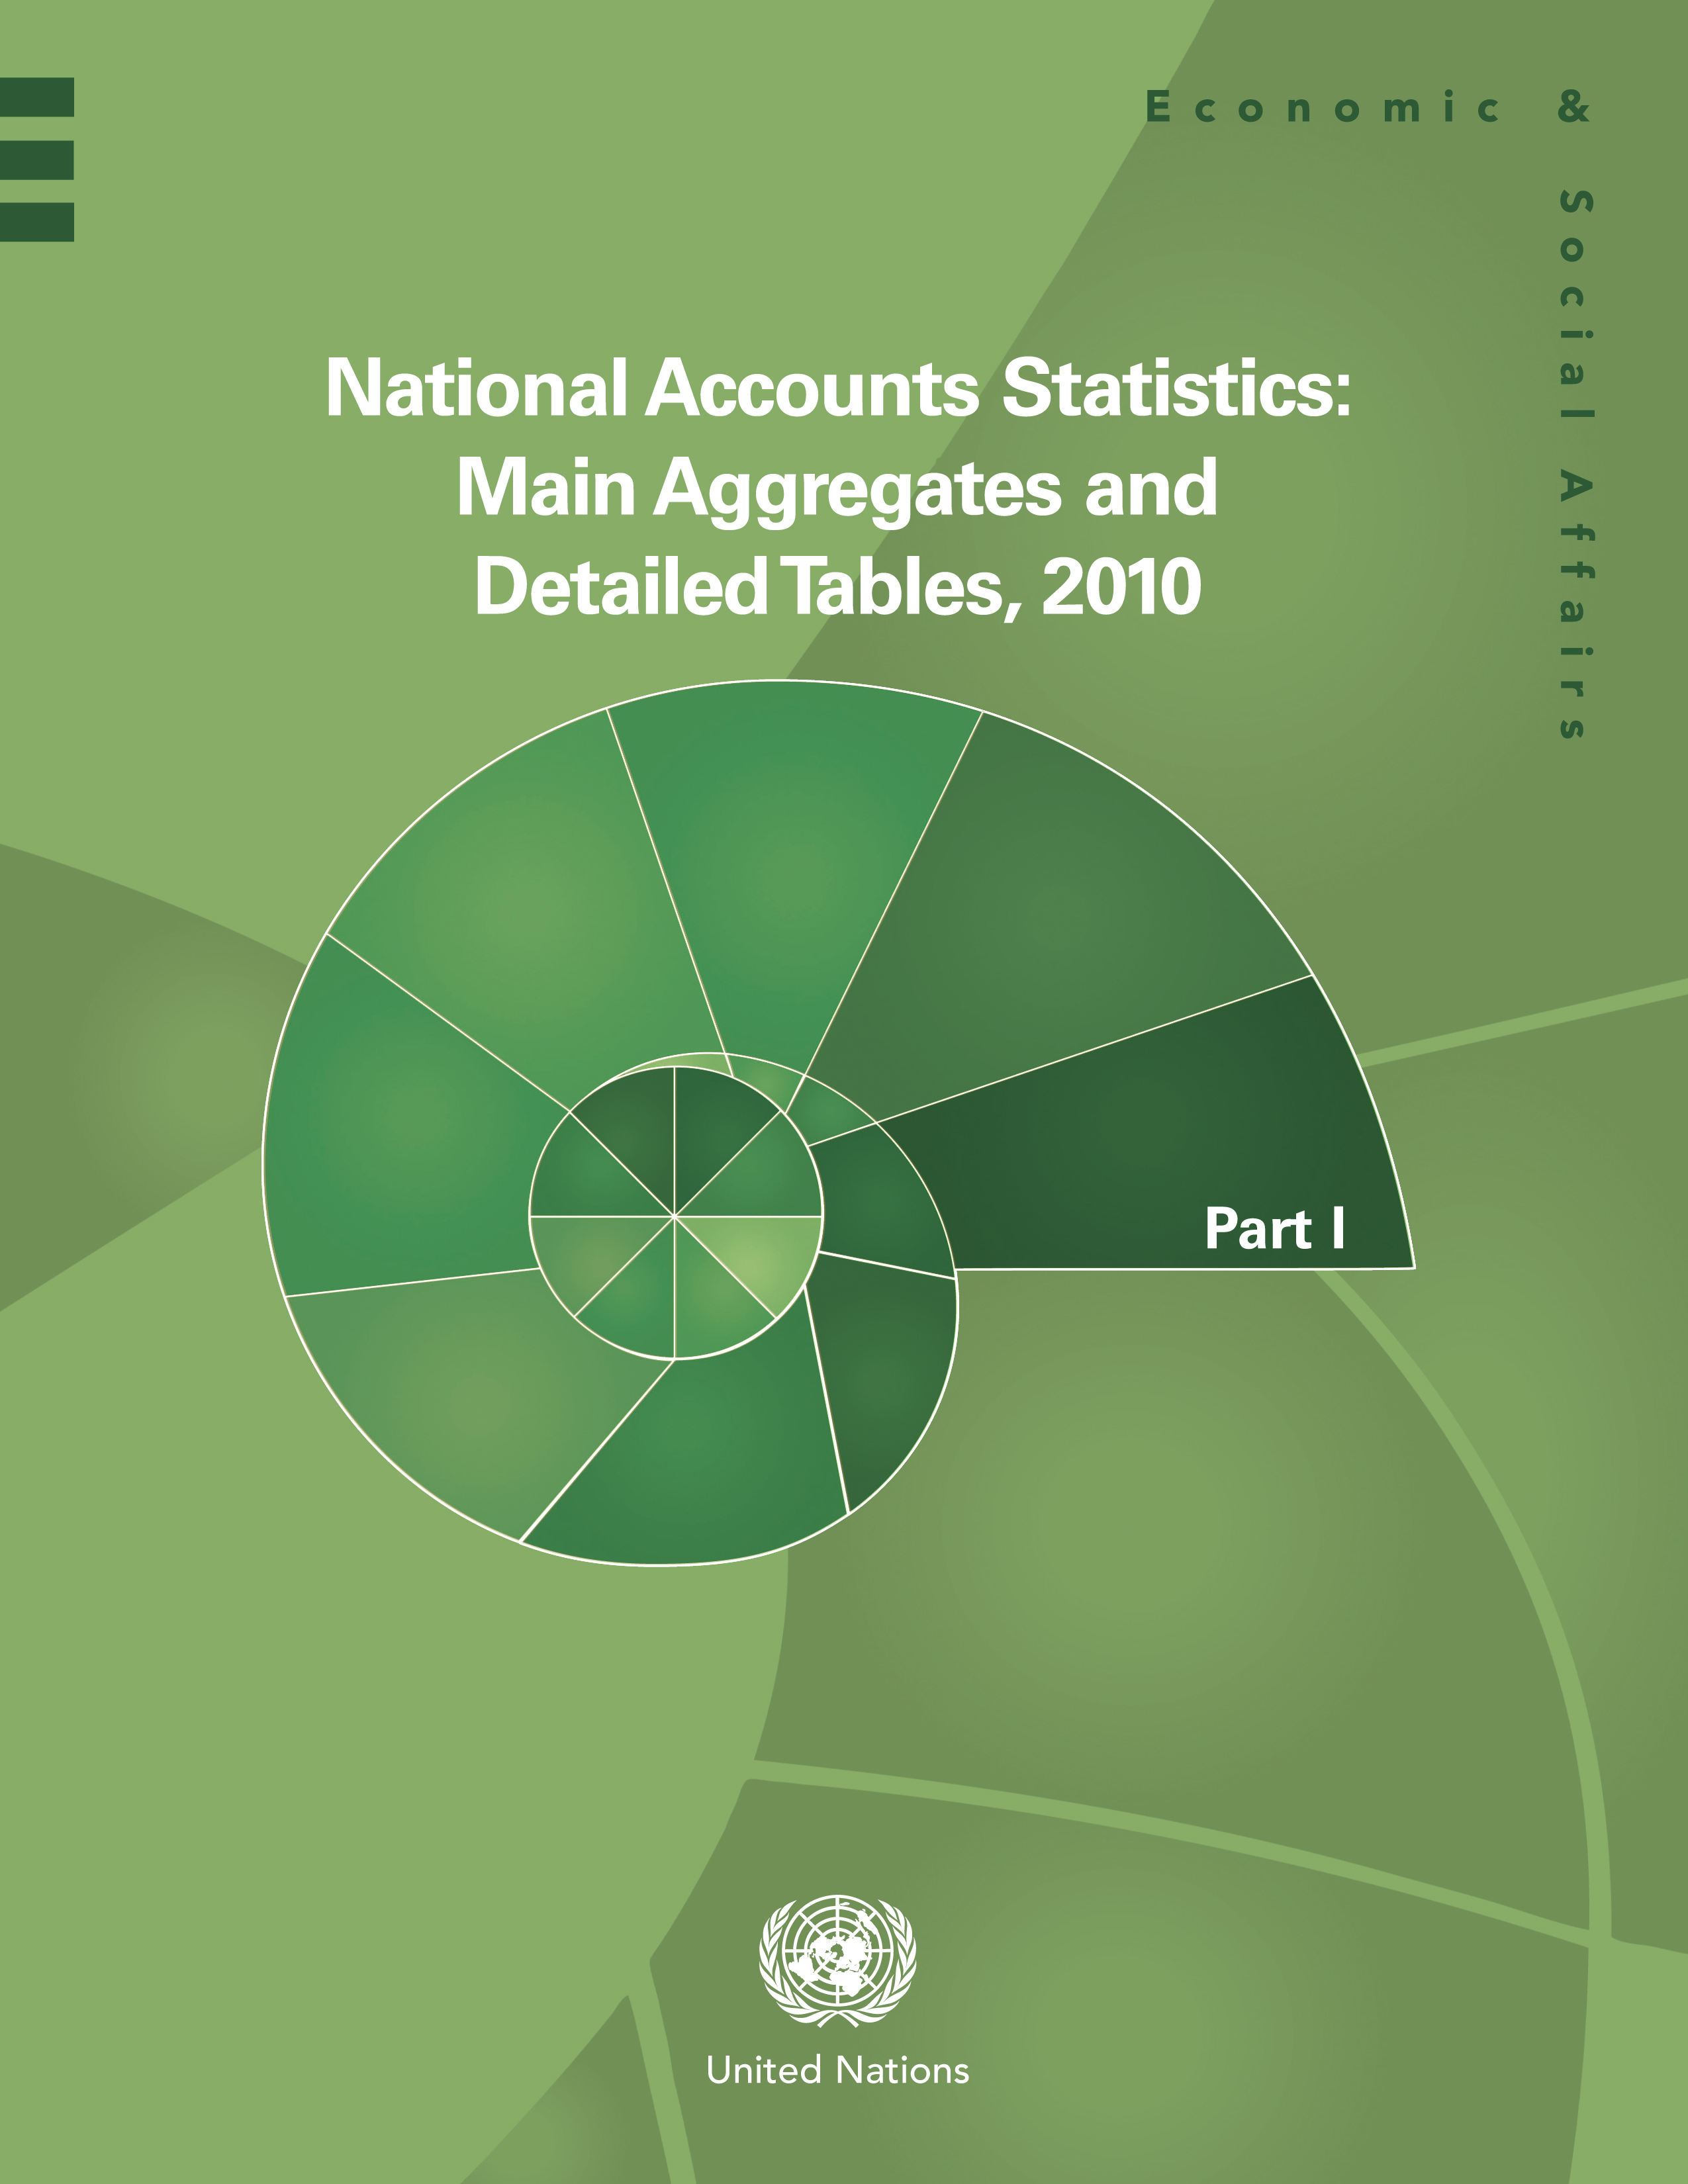 image of National Accounts Statistics: Main Aggregates and Detailed Tables 2010